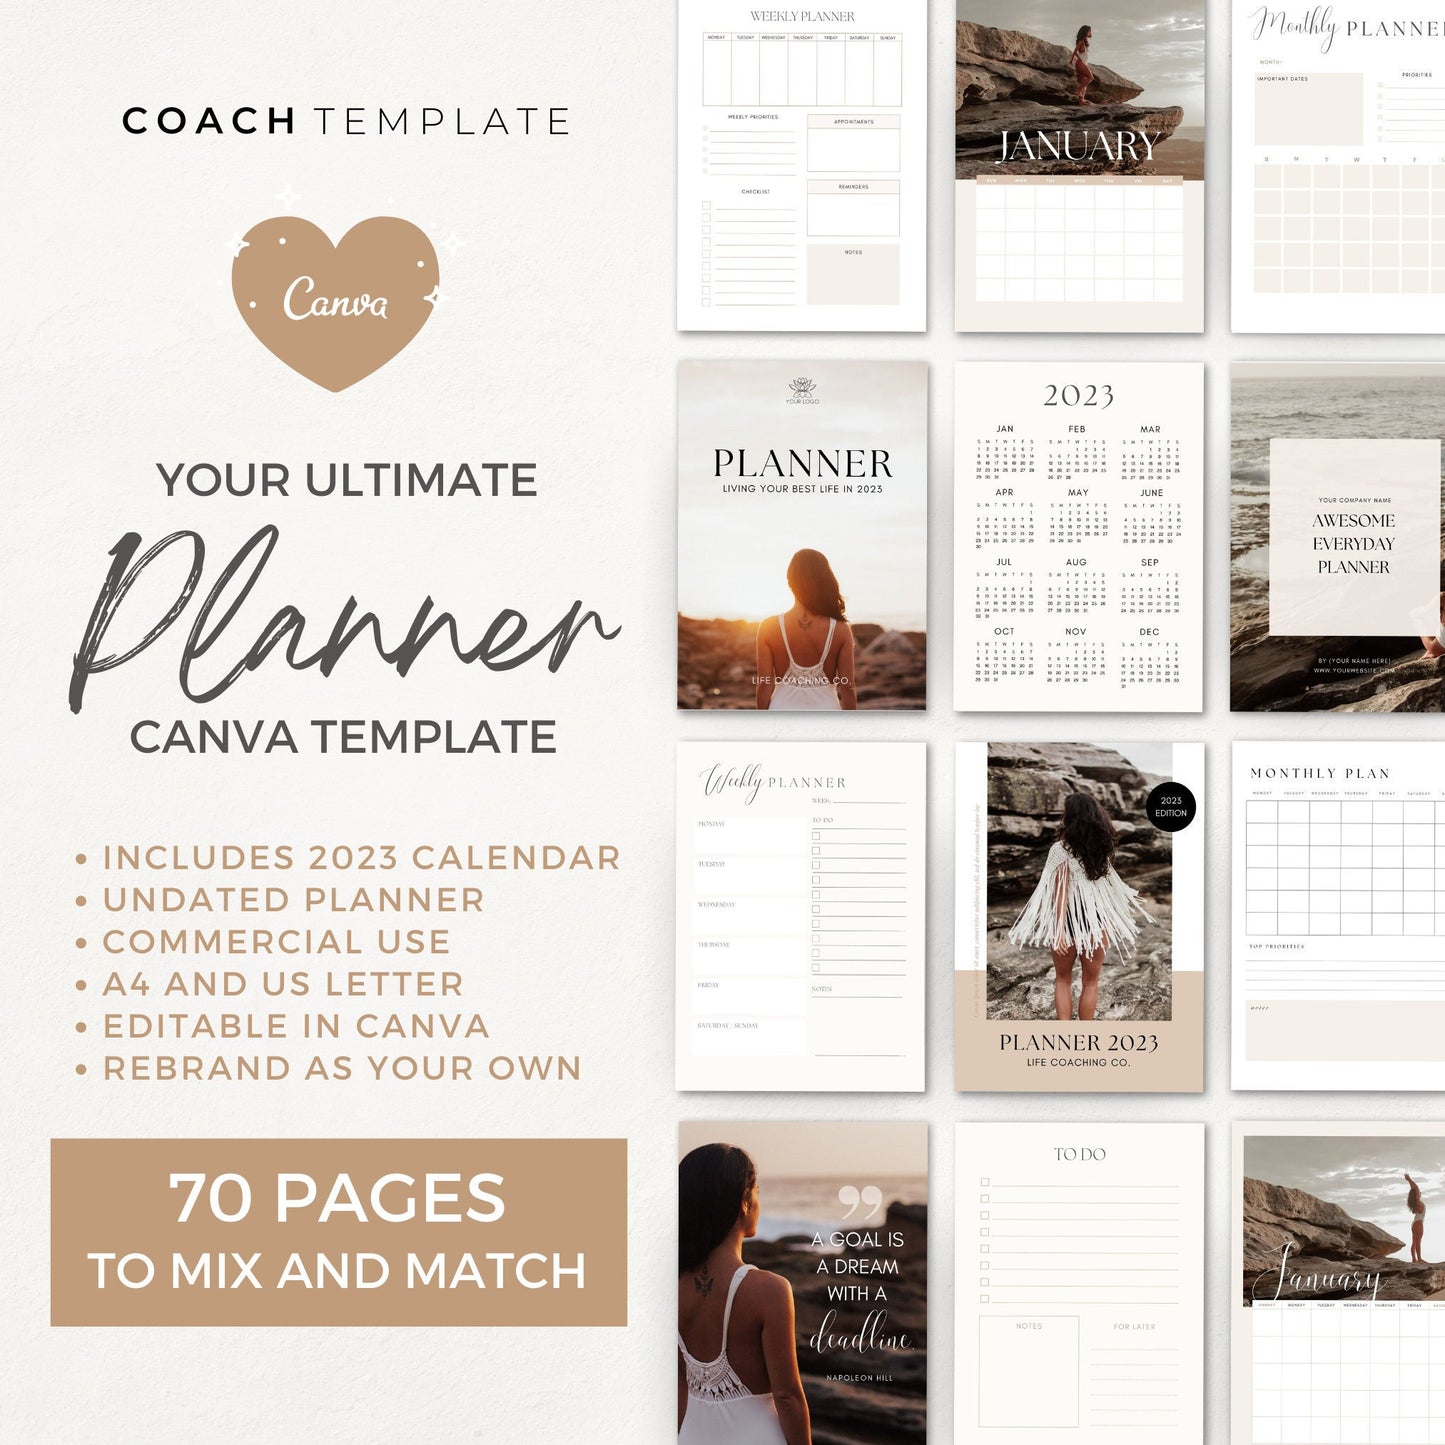 Editable 2023 Calendar Planner Canva Template | Undated Monthly Weekly Daily Planner | Life Coach Business Content Creator Commercial Use

Includes goal productivity habit mood trackers and more. 

CT055 CoachTemplate.com